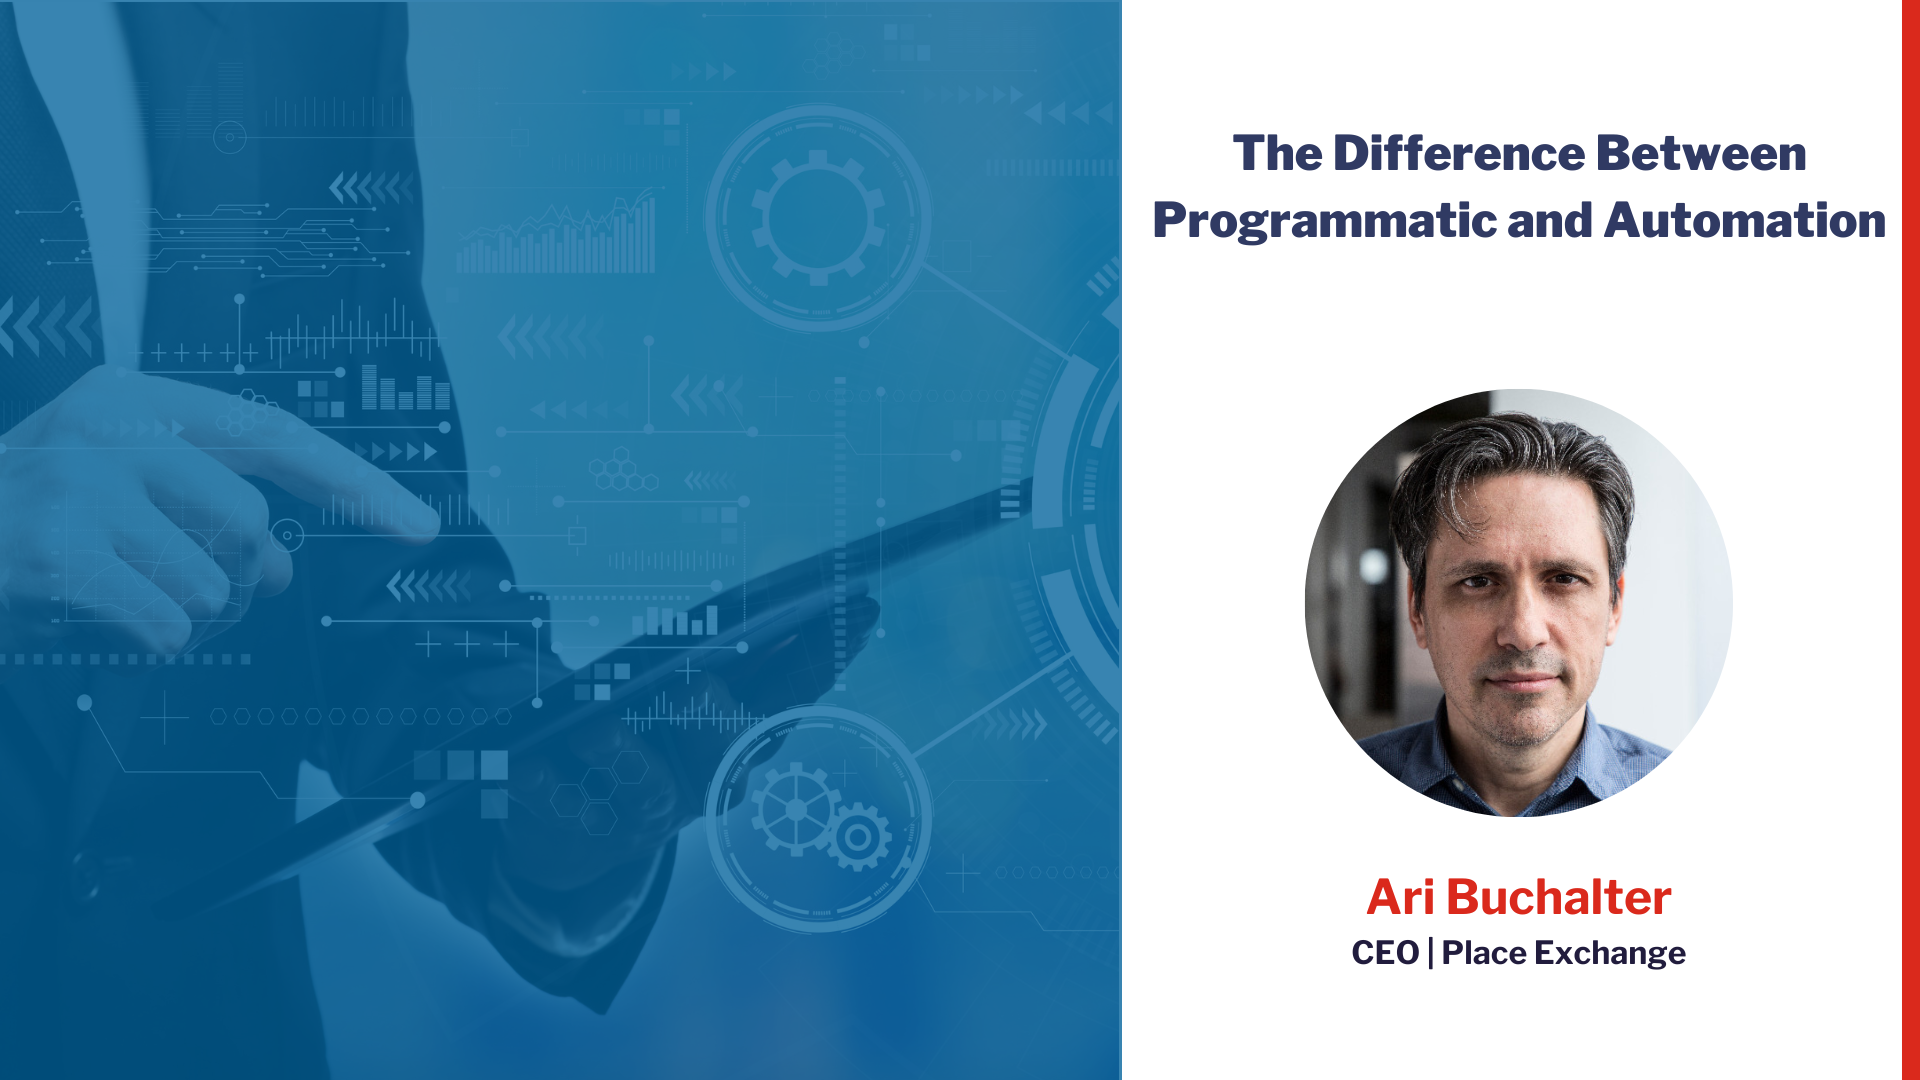 The Difference Between Programmatic and Automation